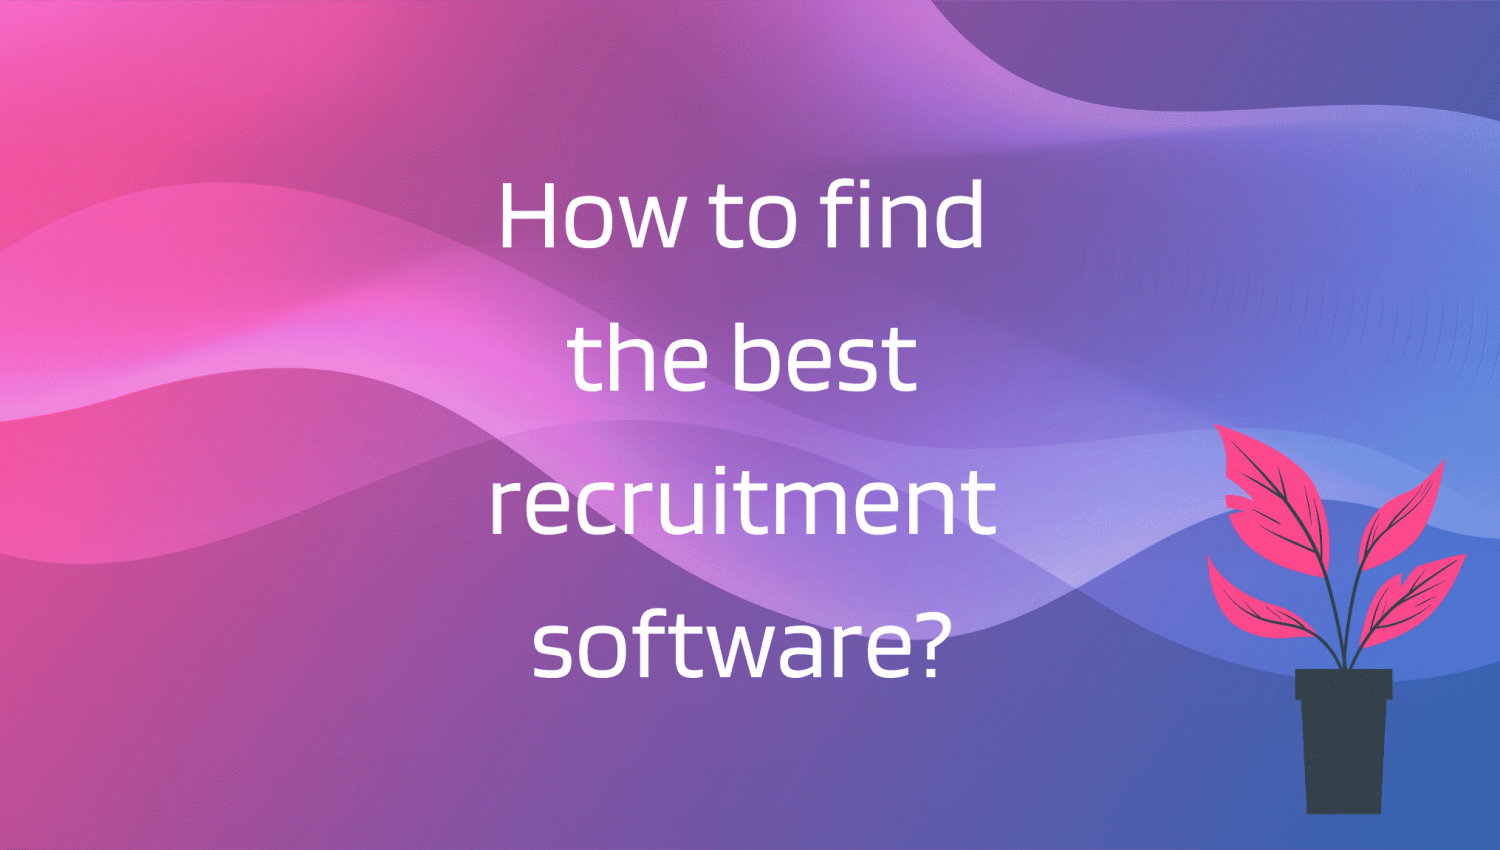 How to find the best recruitment software?